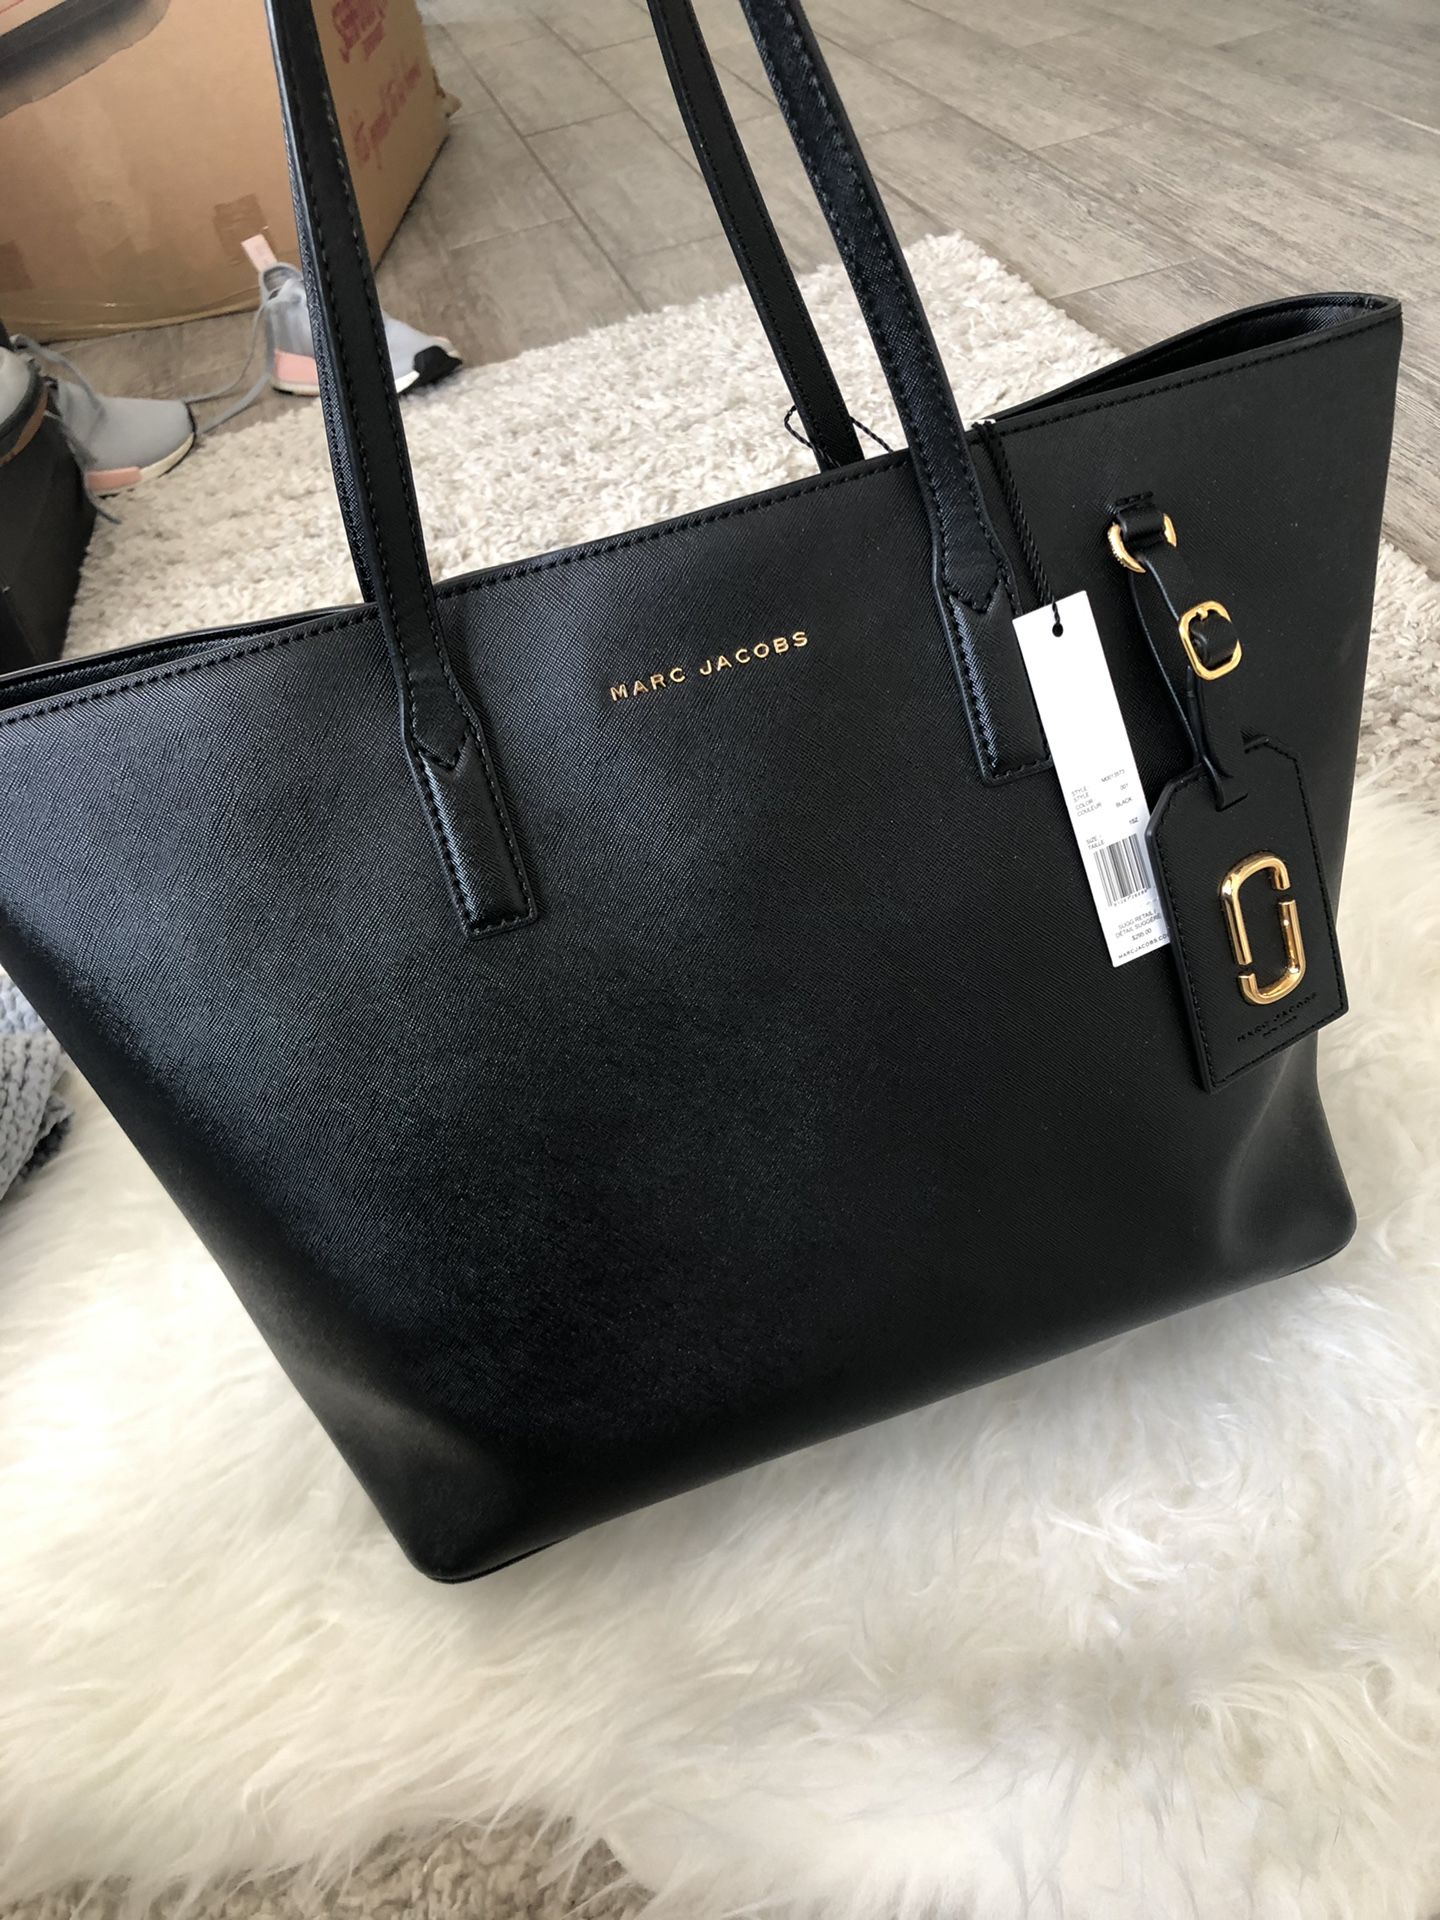 AUTHENTIC MARC JACOBS TOTE BAG